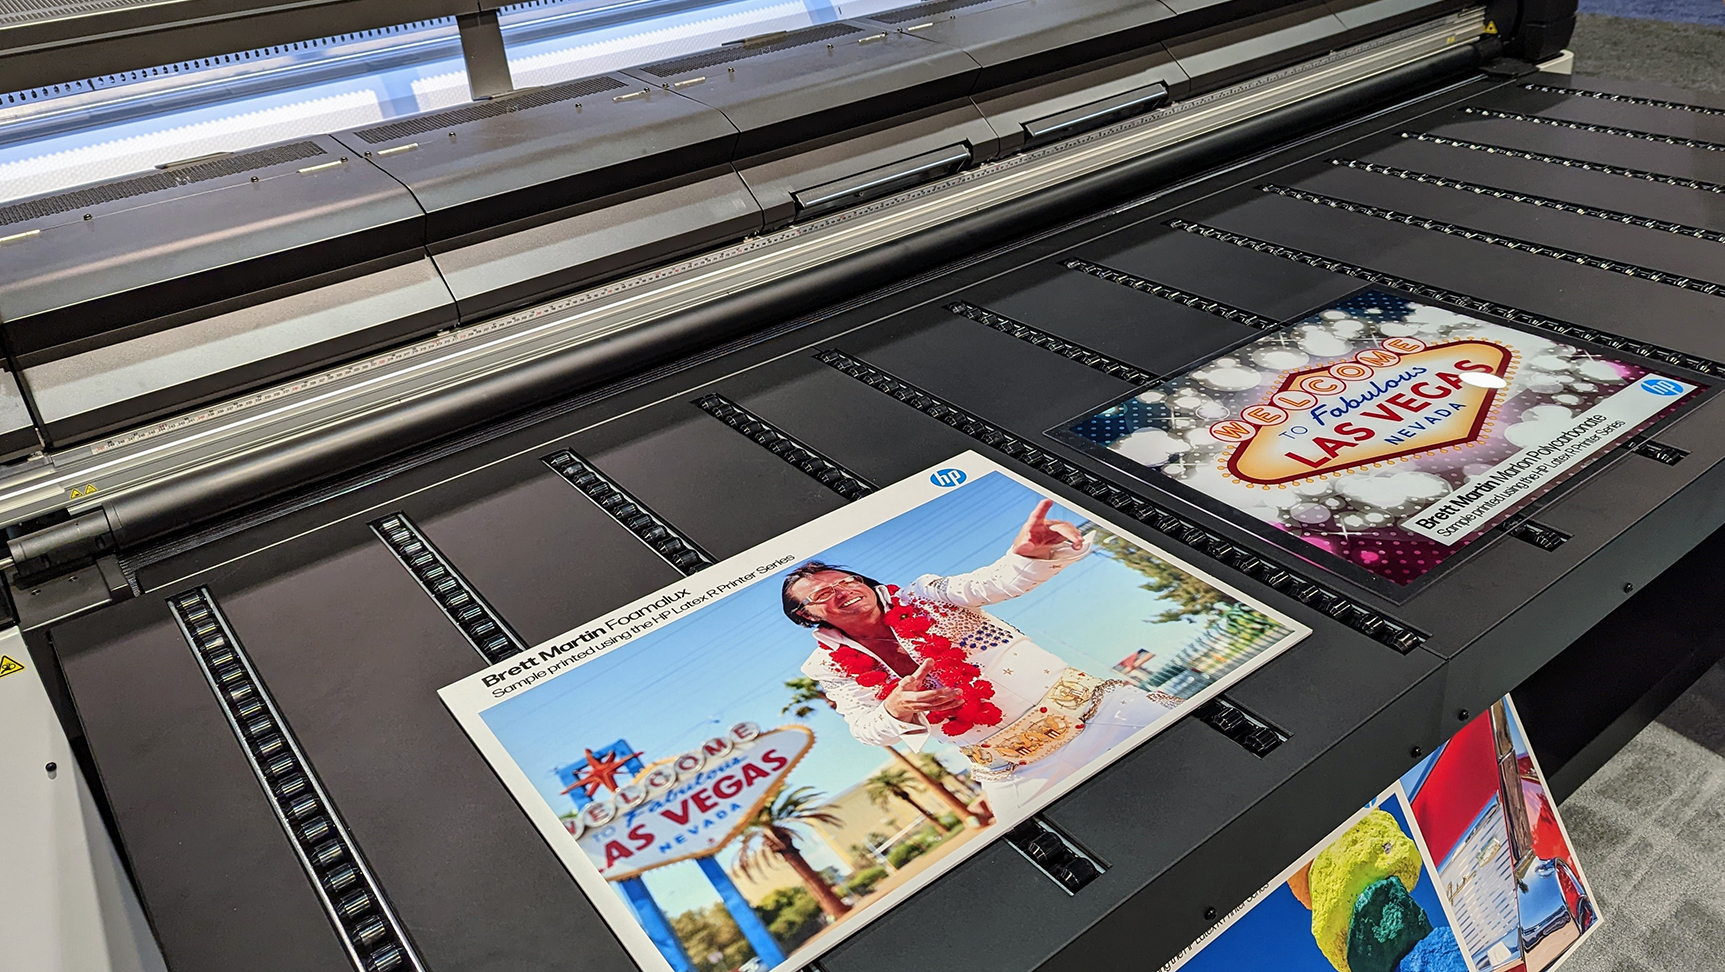 HP print on Foamalux White and Marlon FS at Printing United 2022.